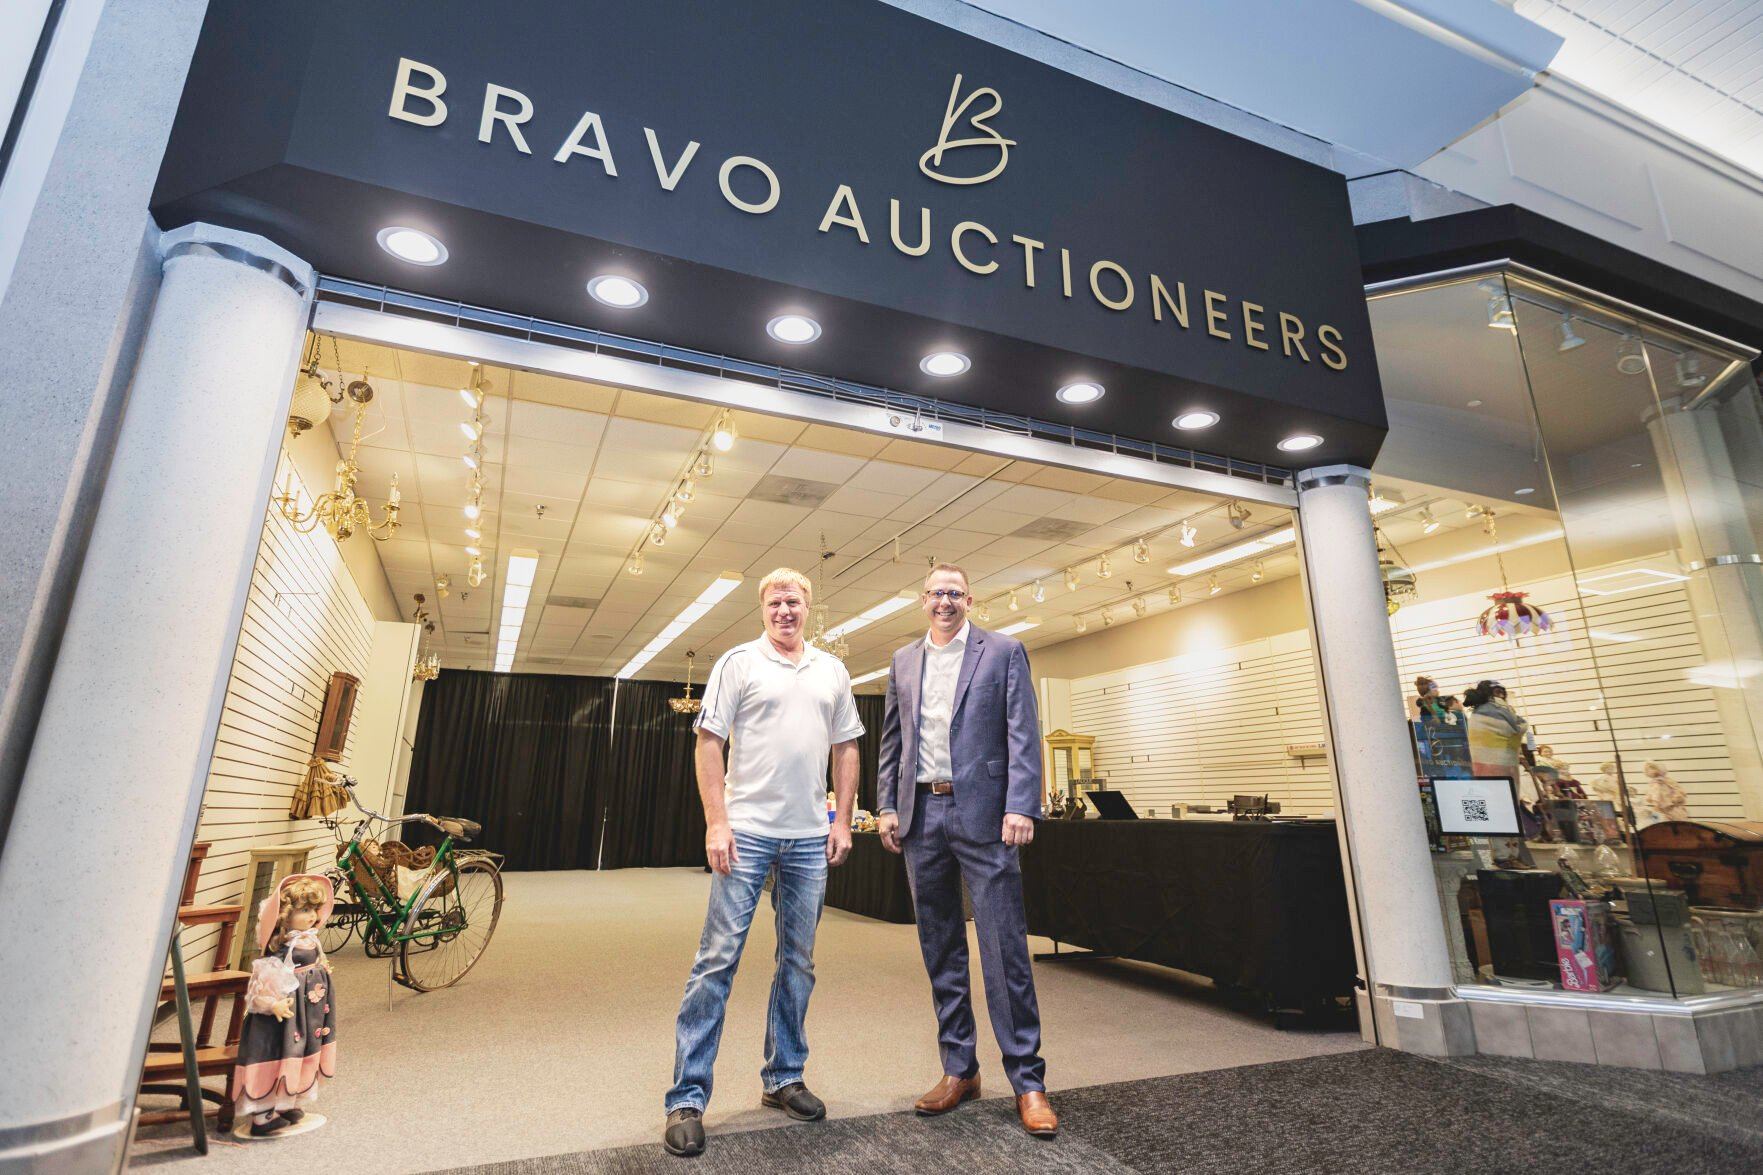 Auctioneer Tim Markham (right) stands with auction coordinator Kraig Ney at the entrance of Bravo Auctioneers at Kennedy Mall in Dubuque. Markham is a second-generation auctioneer.    PHOTO CREDIT: Thomas Eckermann